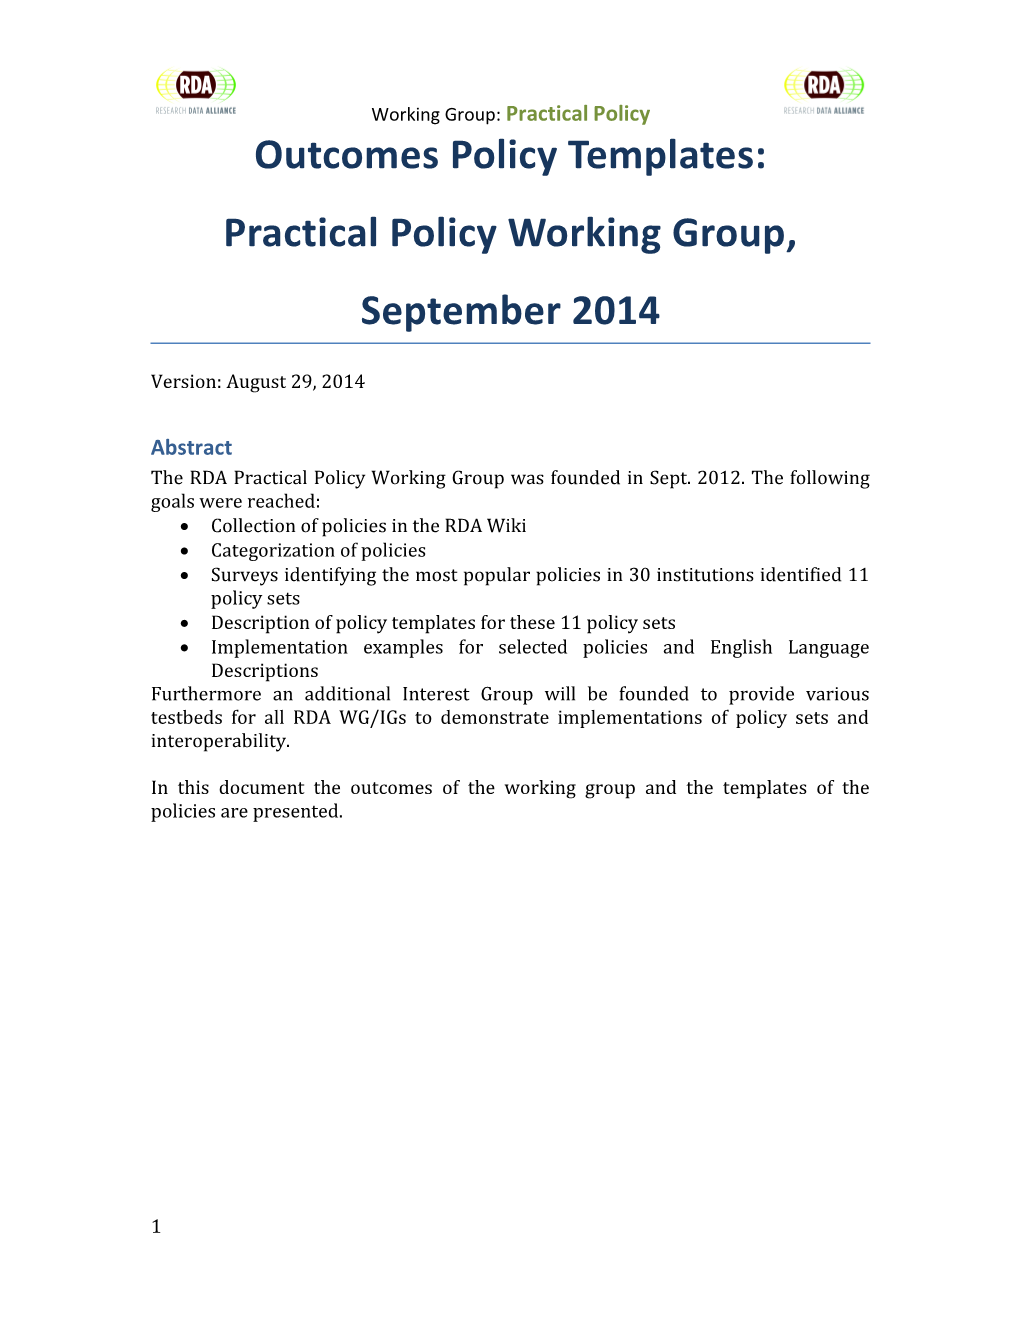 Practical Policy Working Group